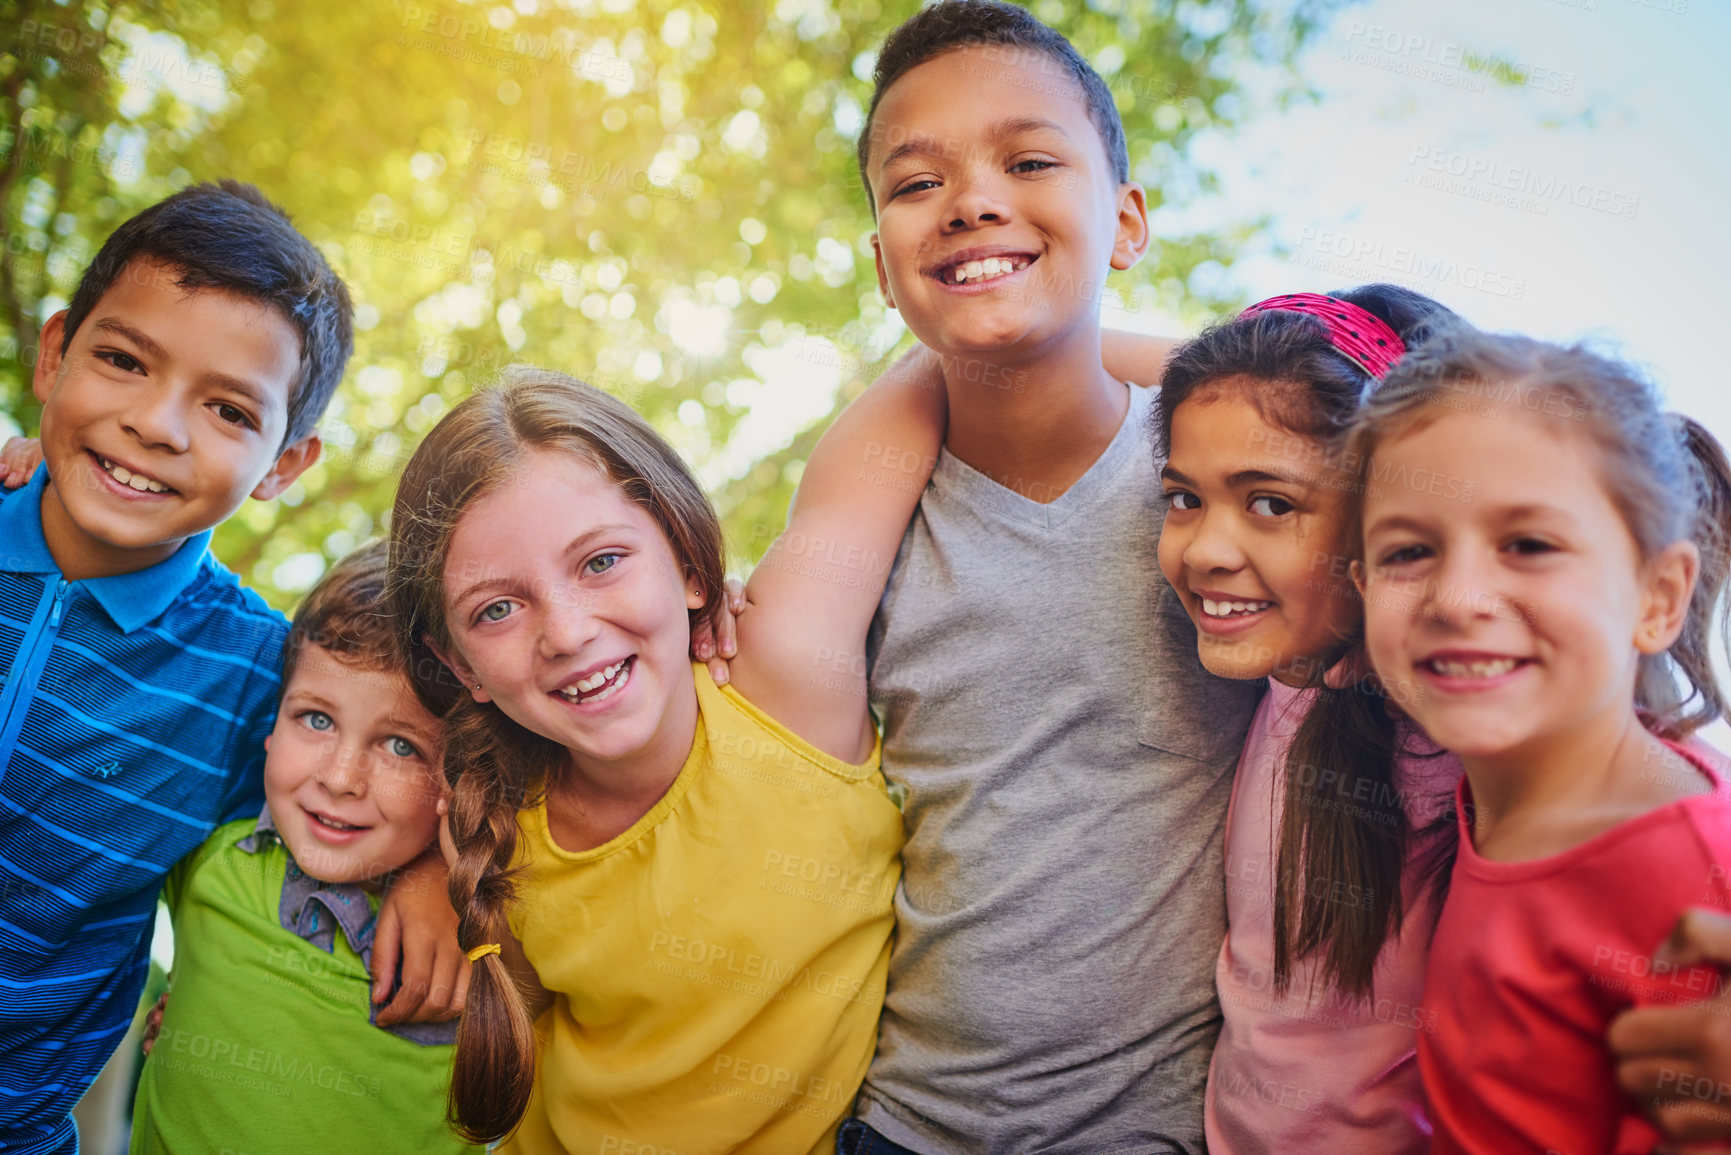 Buy stock photo Shot of a diverse group of children outside